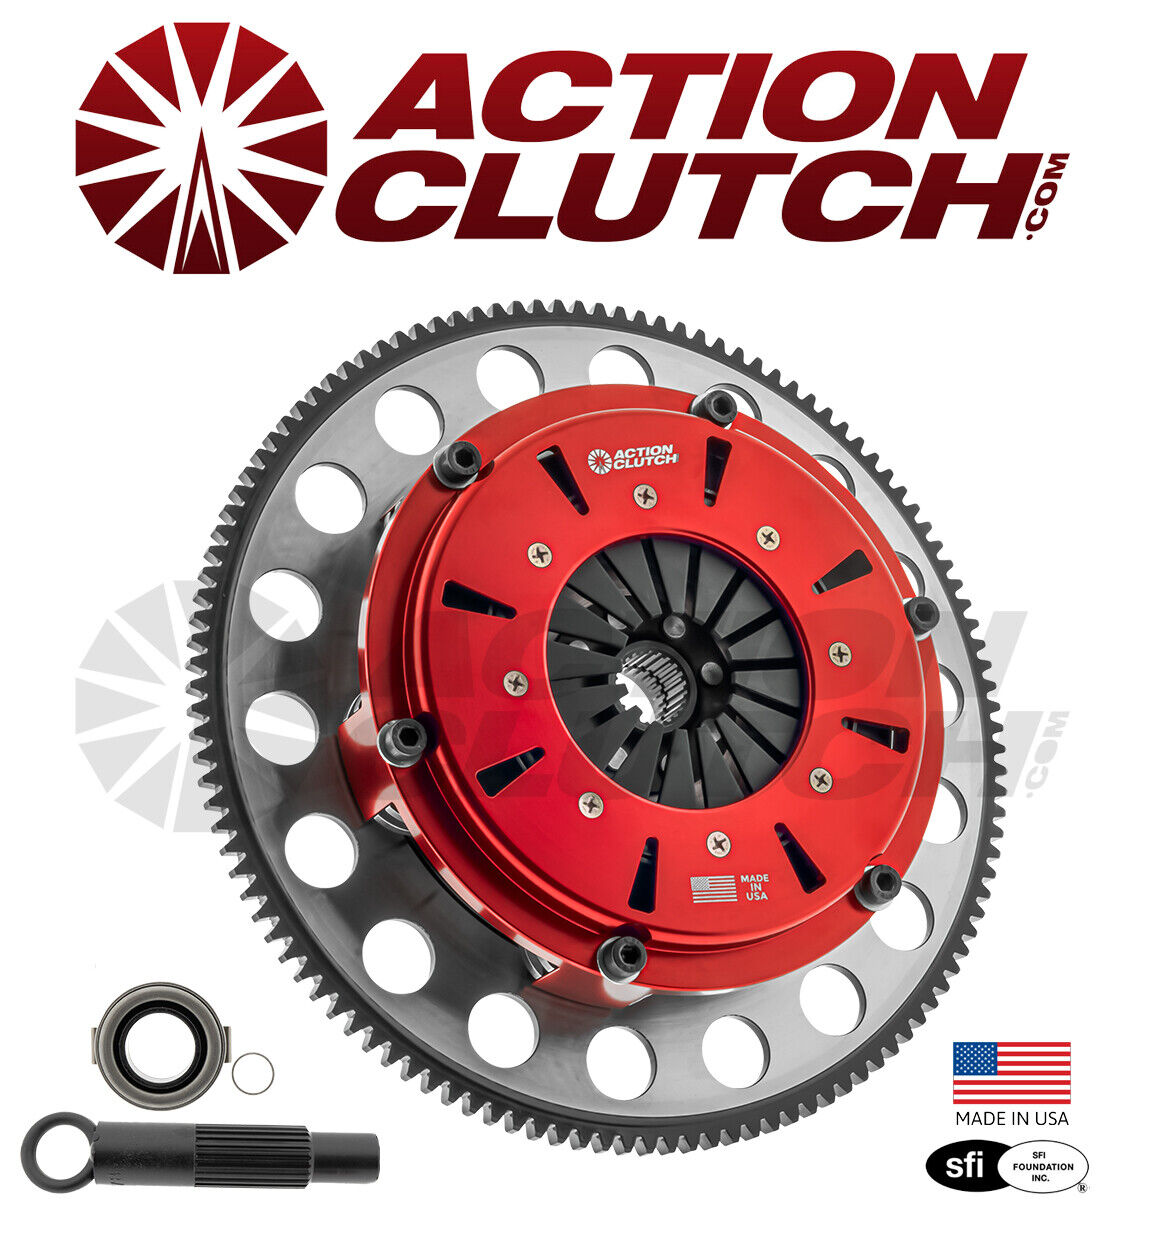 ACTION CLUTCH TWIN DISC 750-900HP FOR HONDA CIVIC SI ACURA RSX K-SERIES *US MADE